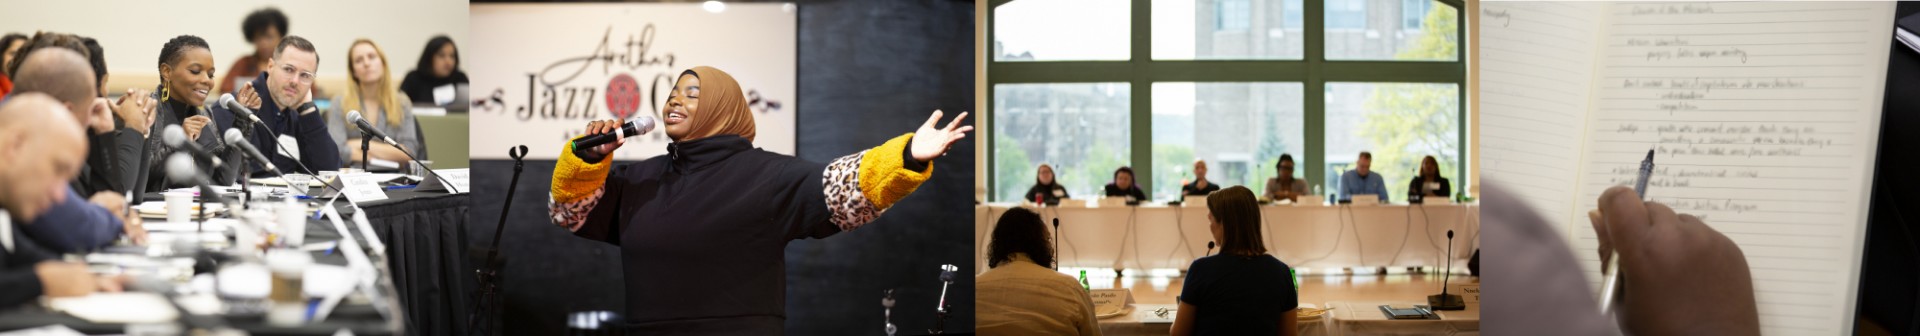 A bar of four images: far left, a picture of Round Table participants sitting around a table with microphones listening to a speaker, middle left, a woman with a hijab singing, middle right, a woman speaking before a group of people at a table, far right, a notebook with writing on it.